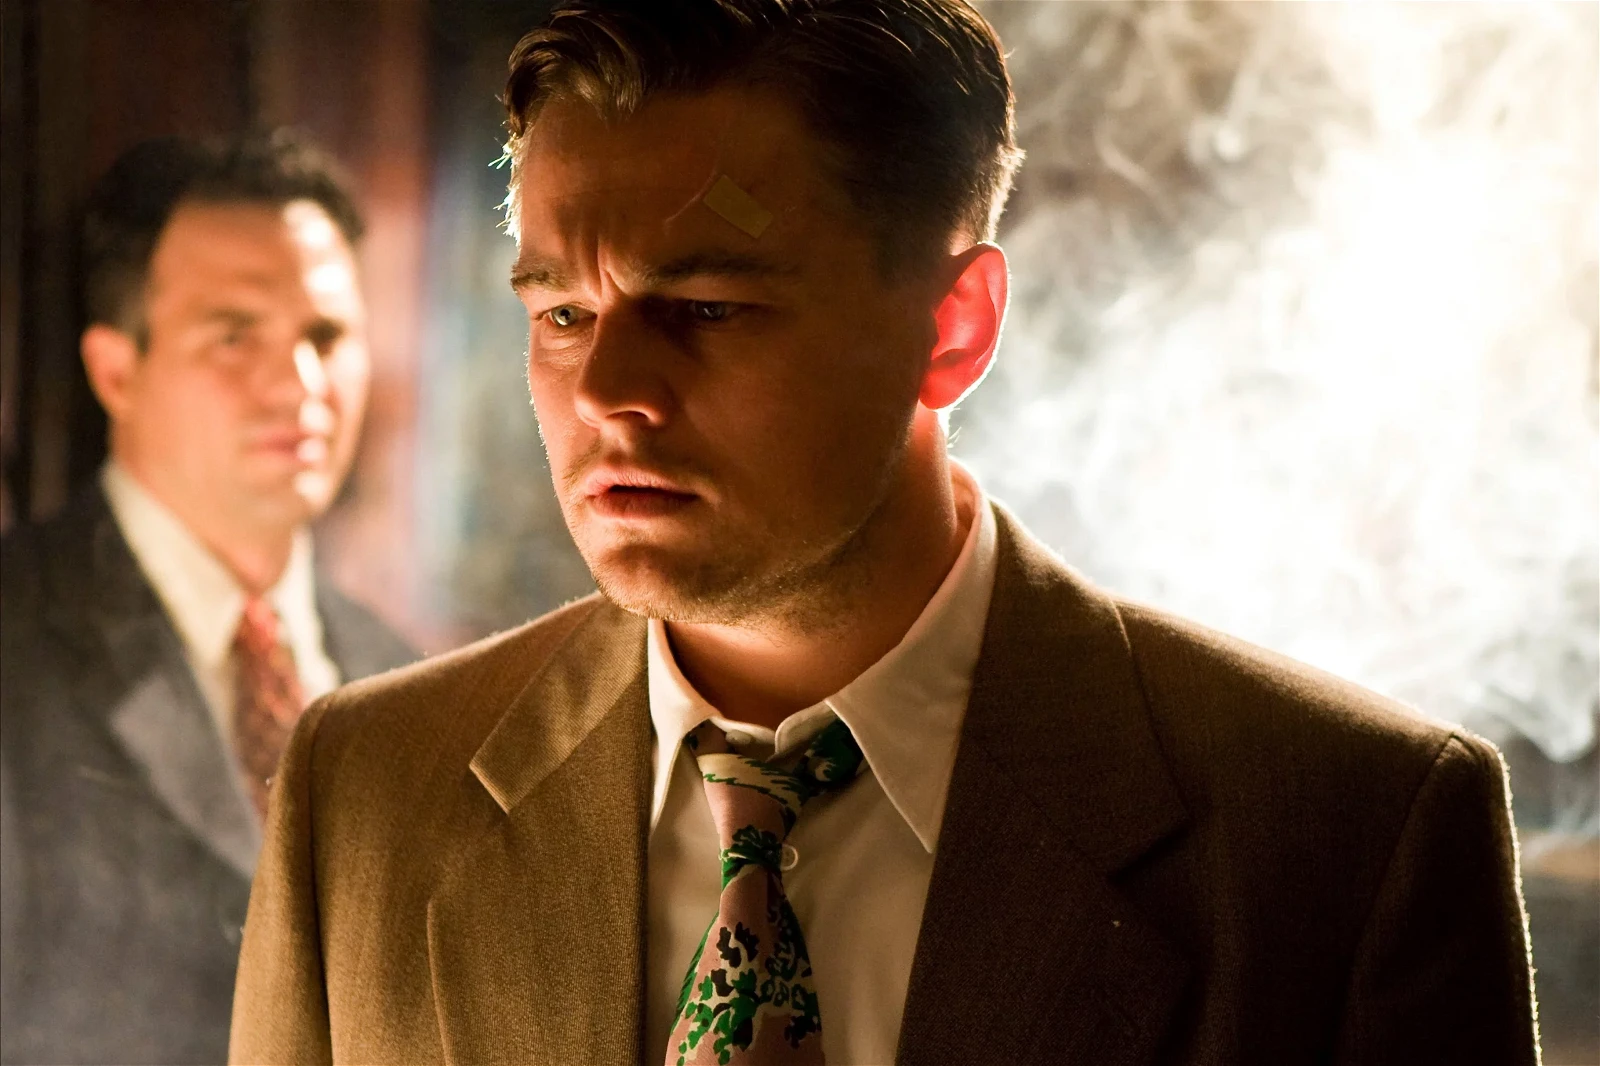 Leonardo DiCaprio has starred in many famous movies such as Shutter Island (2010), The Wolf of Wall Street (2013), and Titanic (1997).